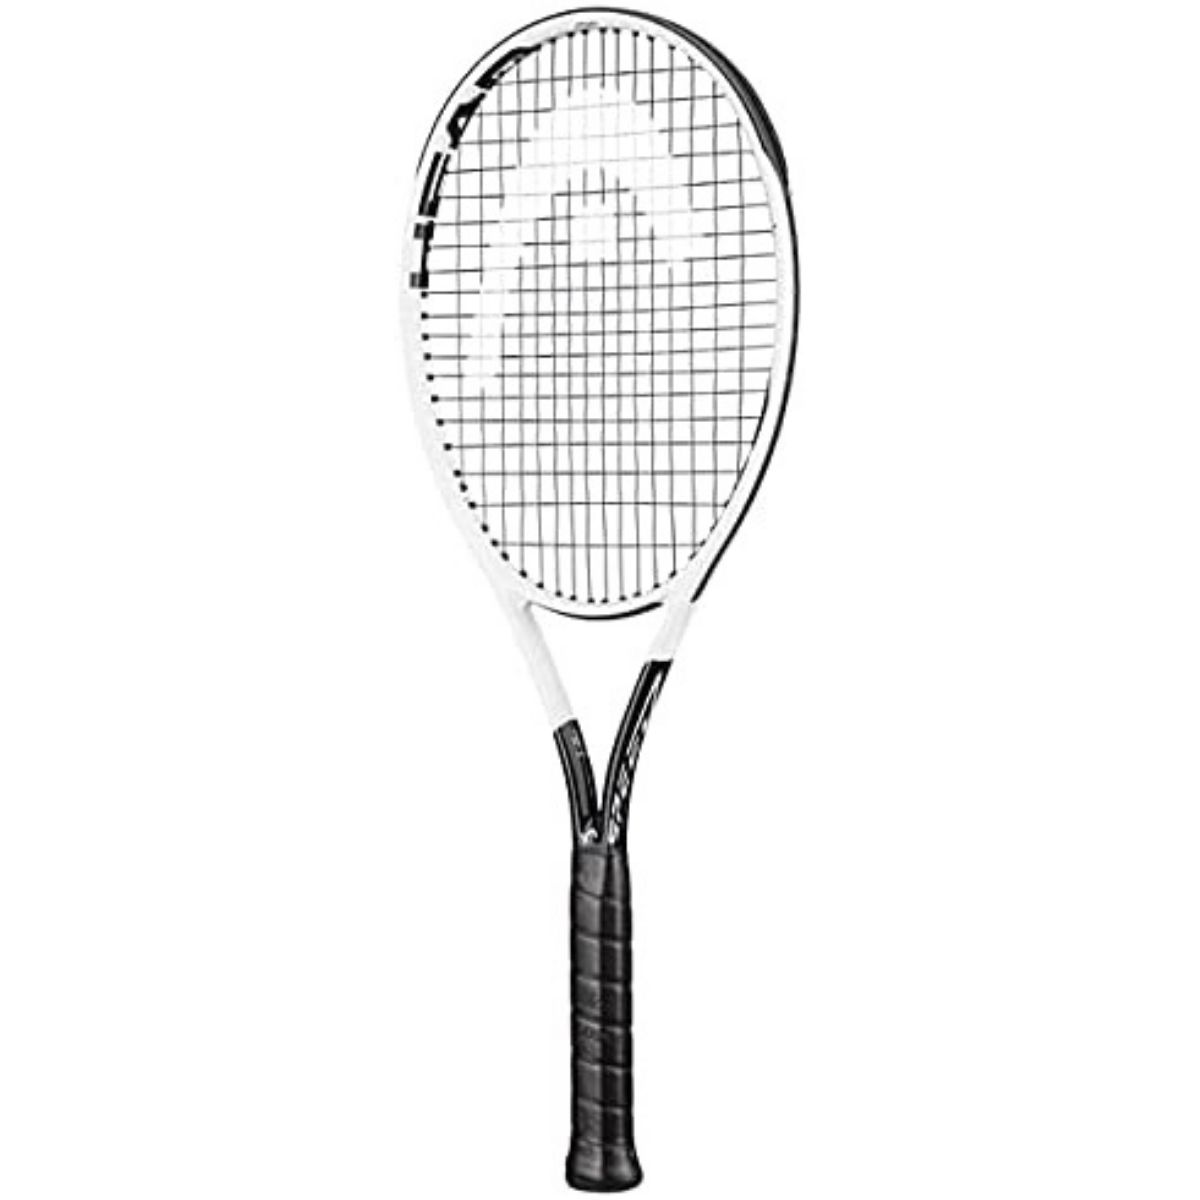 The Best Tennis Rackets for Intermediate Players Options: Head Graphene 360+ Speed MP